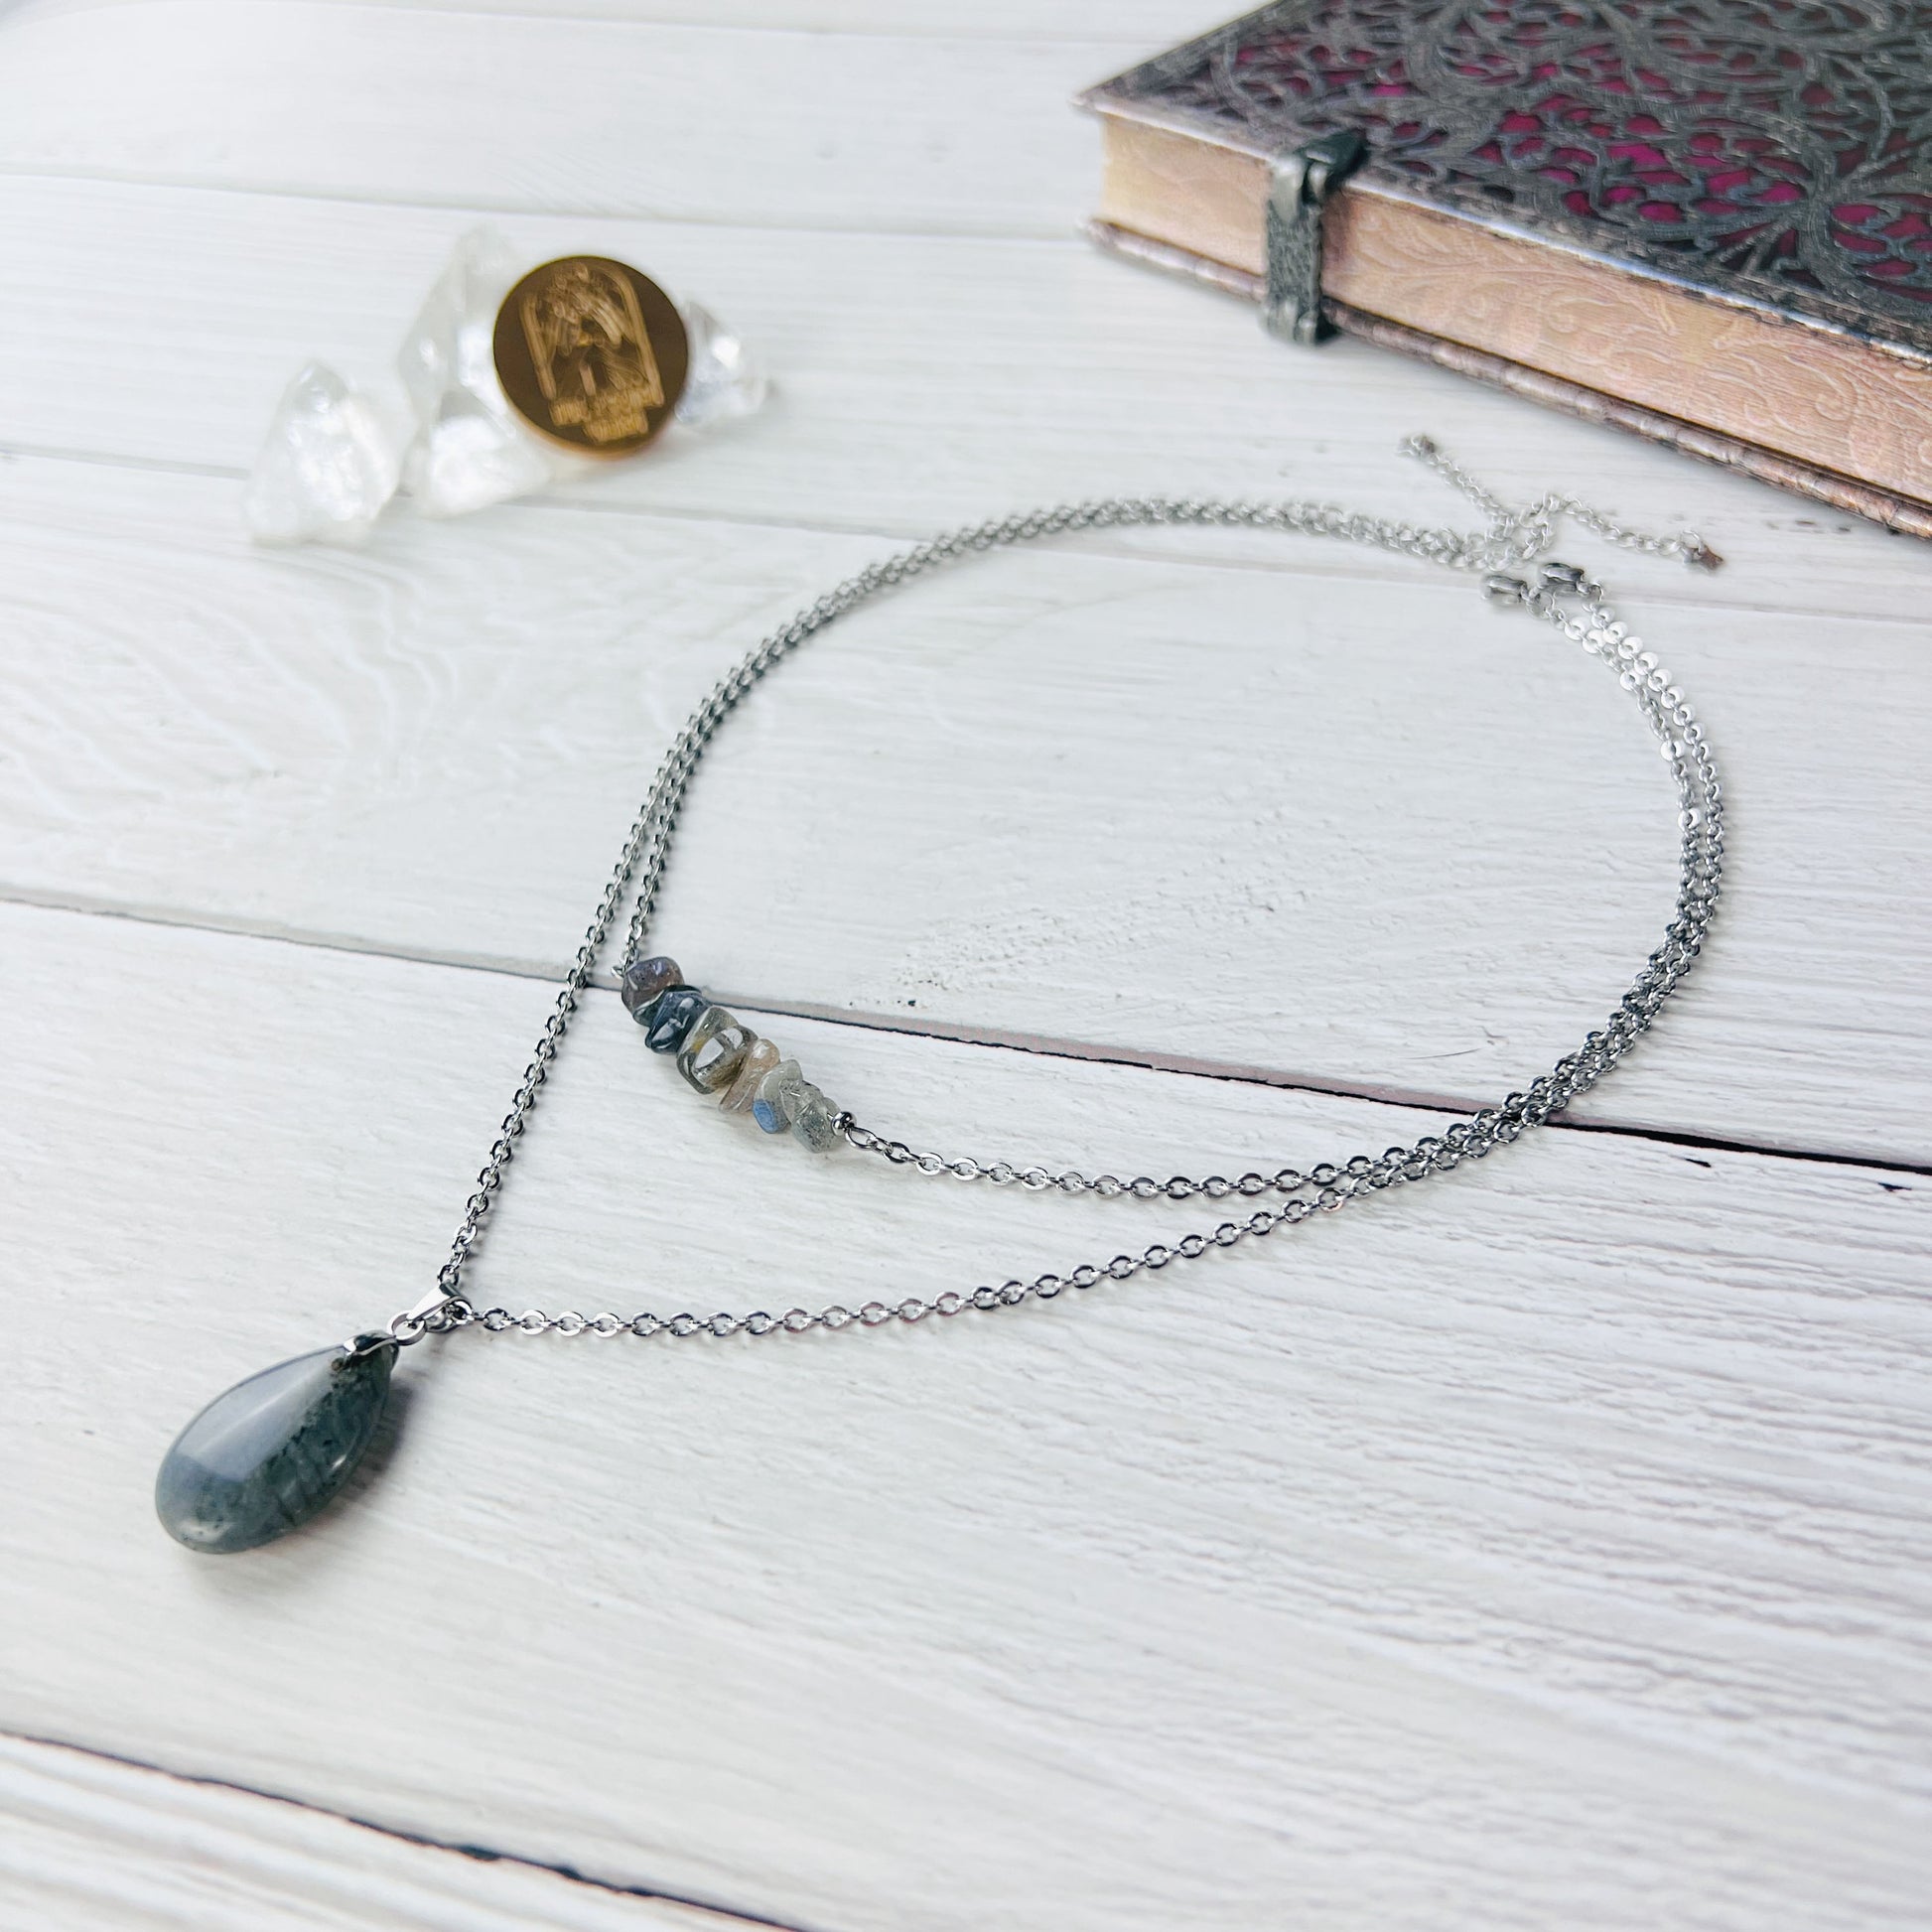 Labradorite necklaces set for layering stainless steel dainty gemstone jewelry